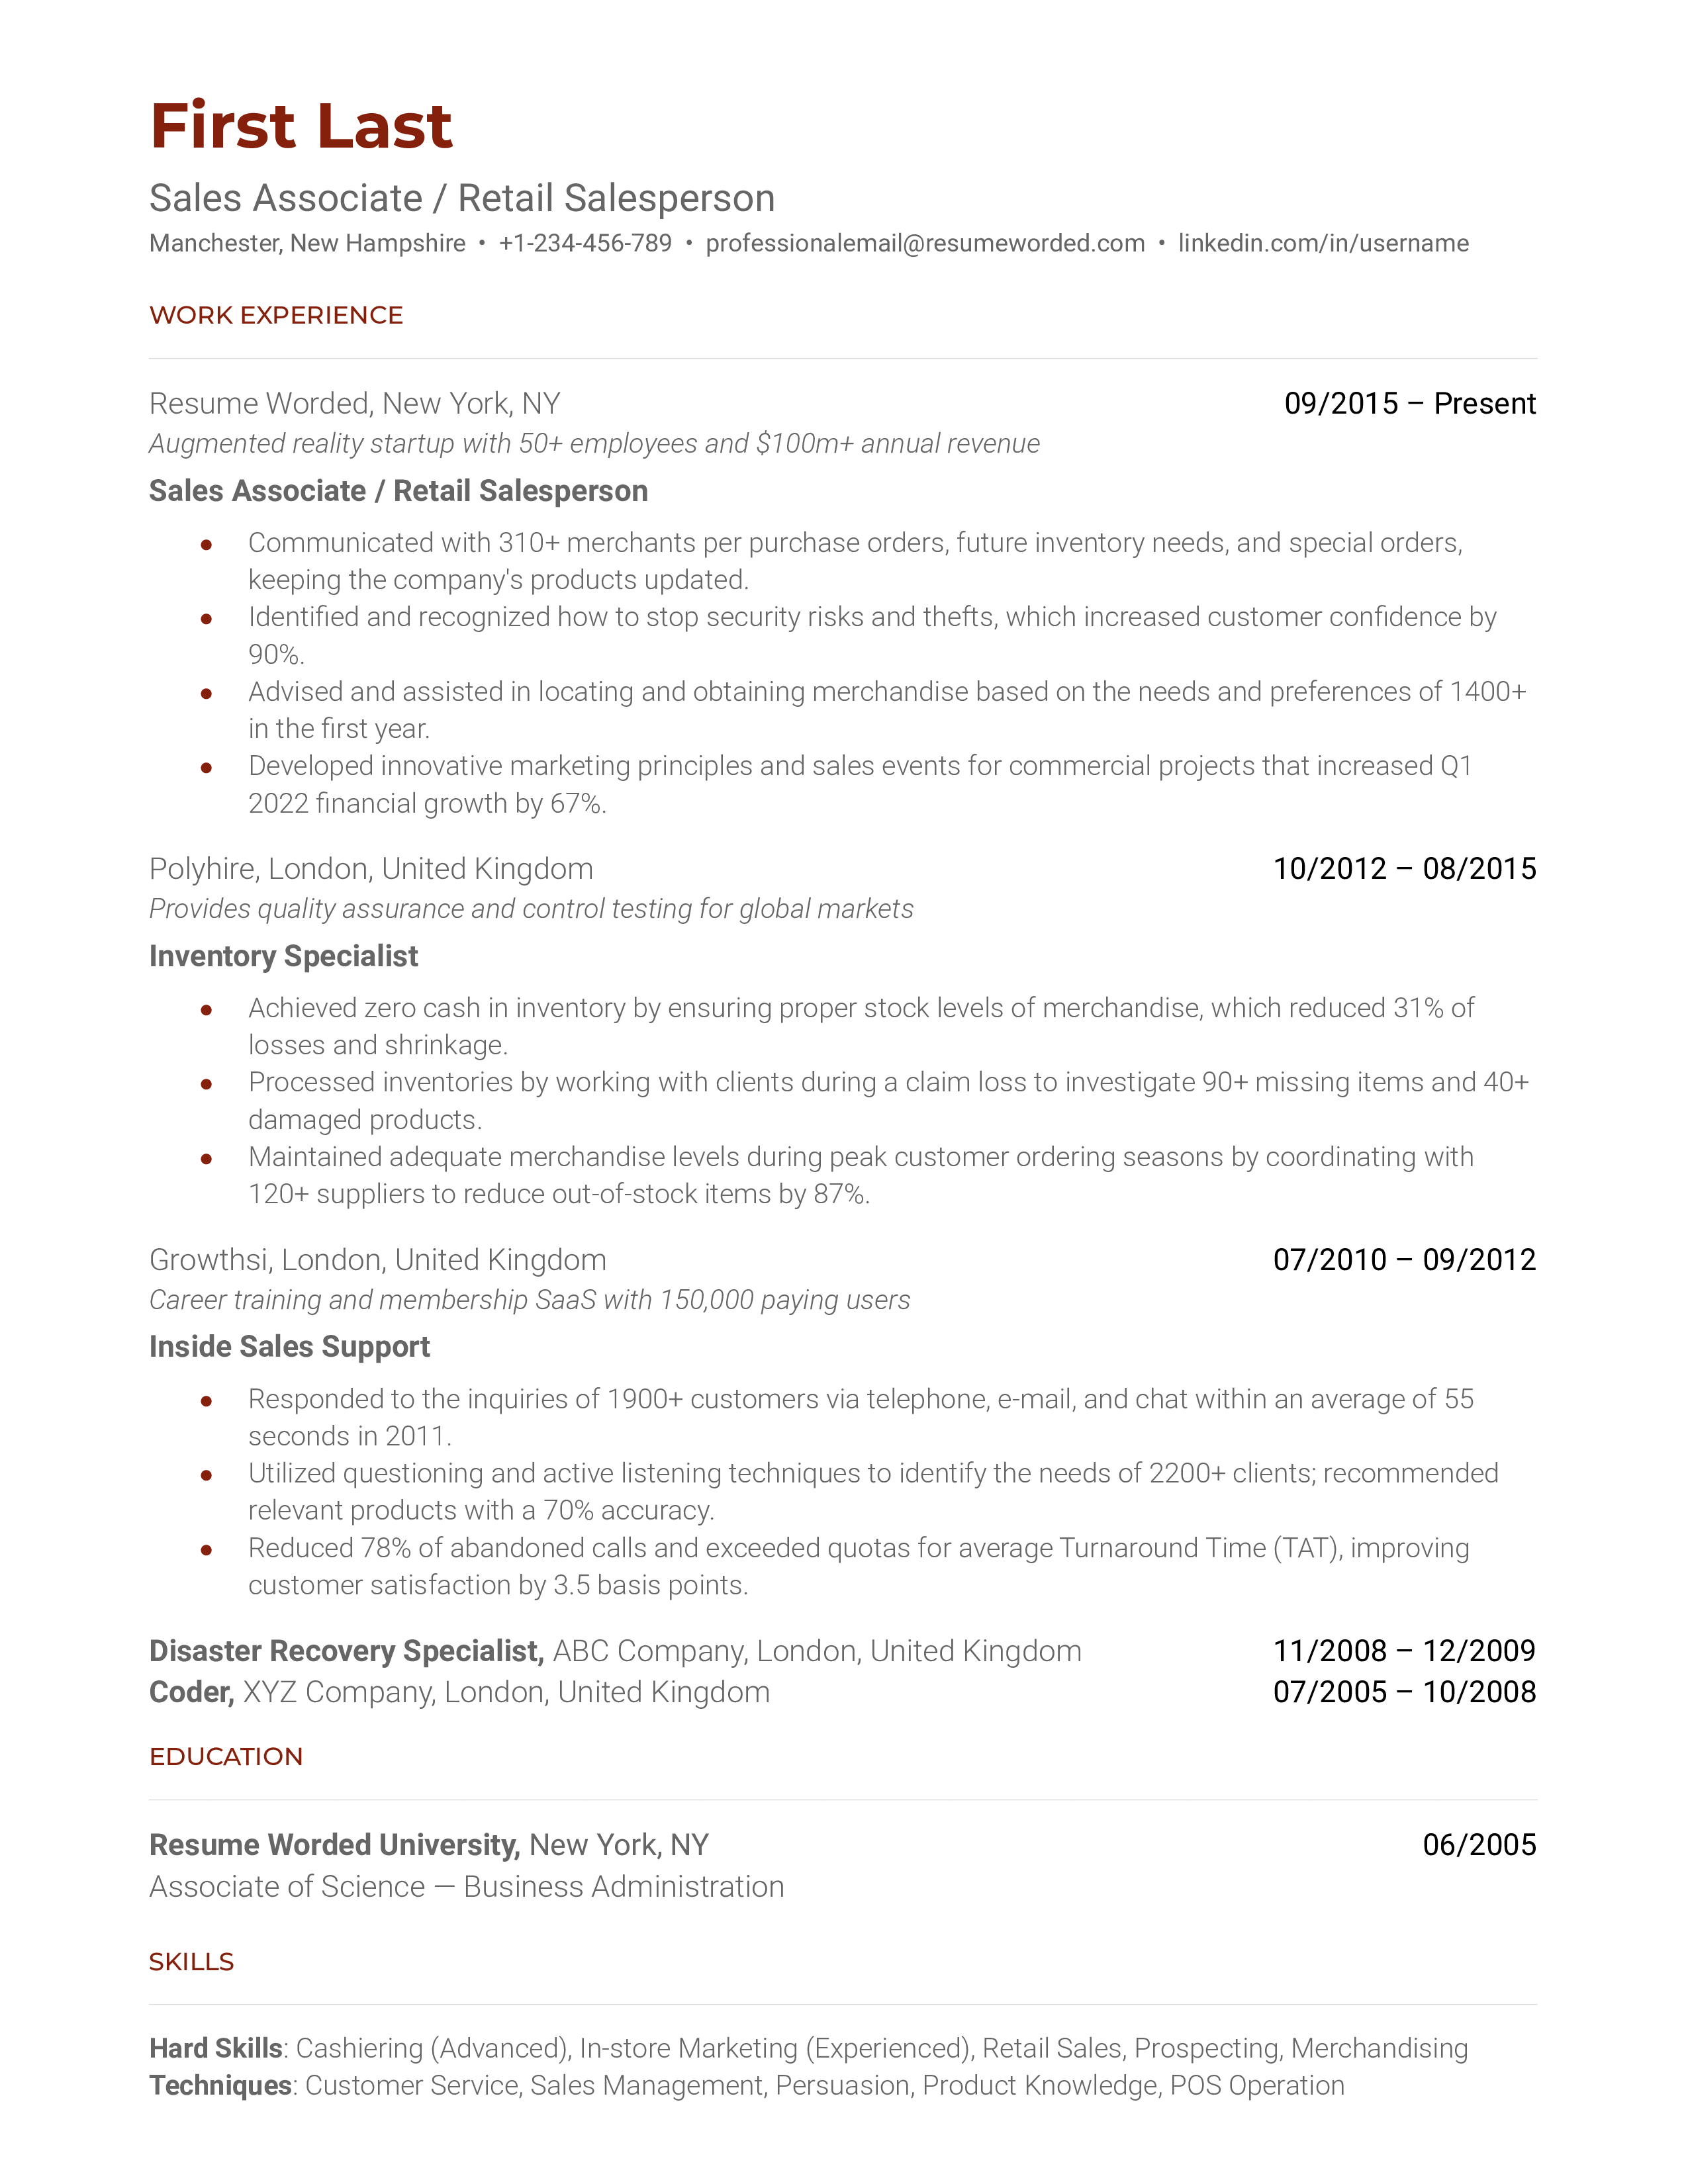 A CV for a Sales Associate highlighting sales achievements and product knowledge.